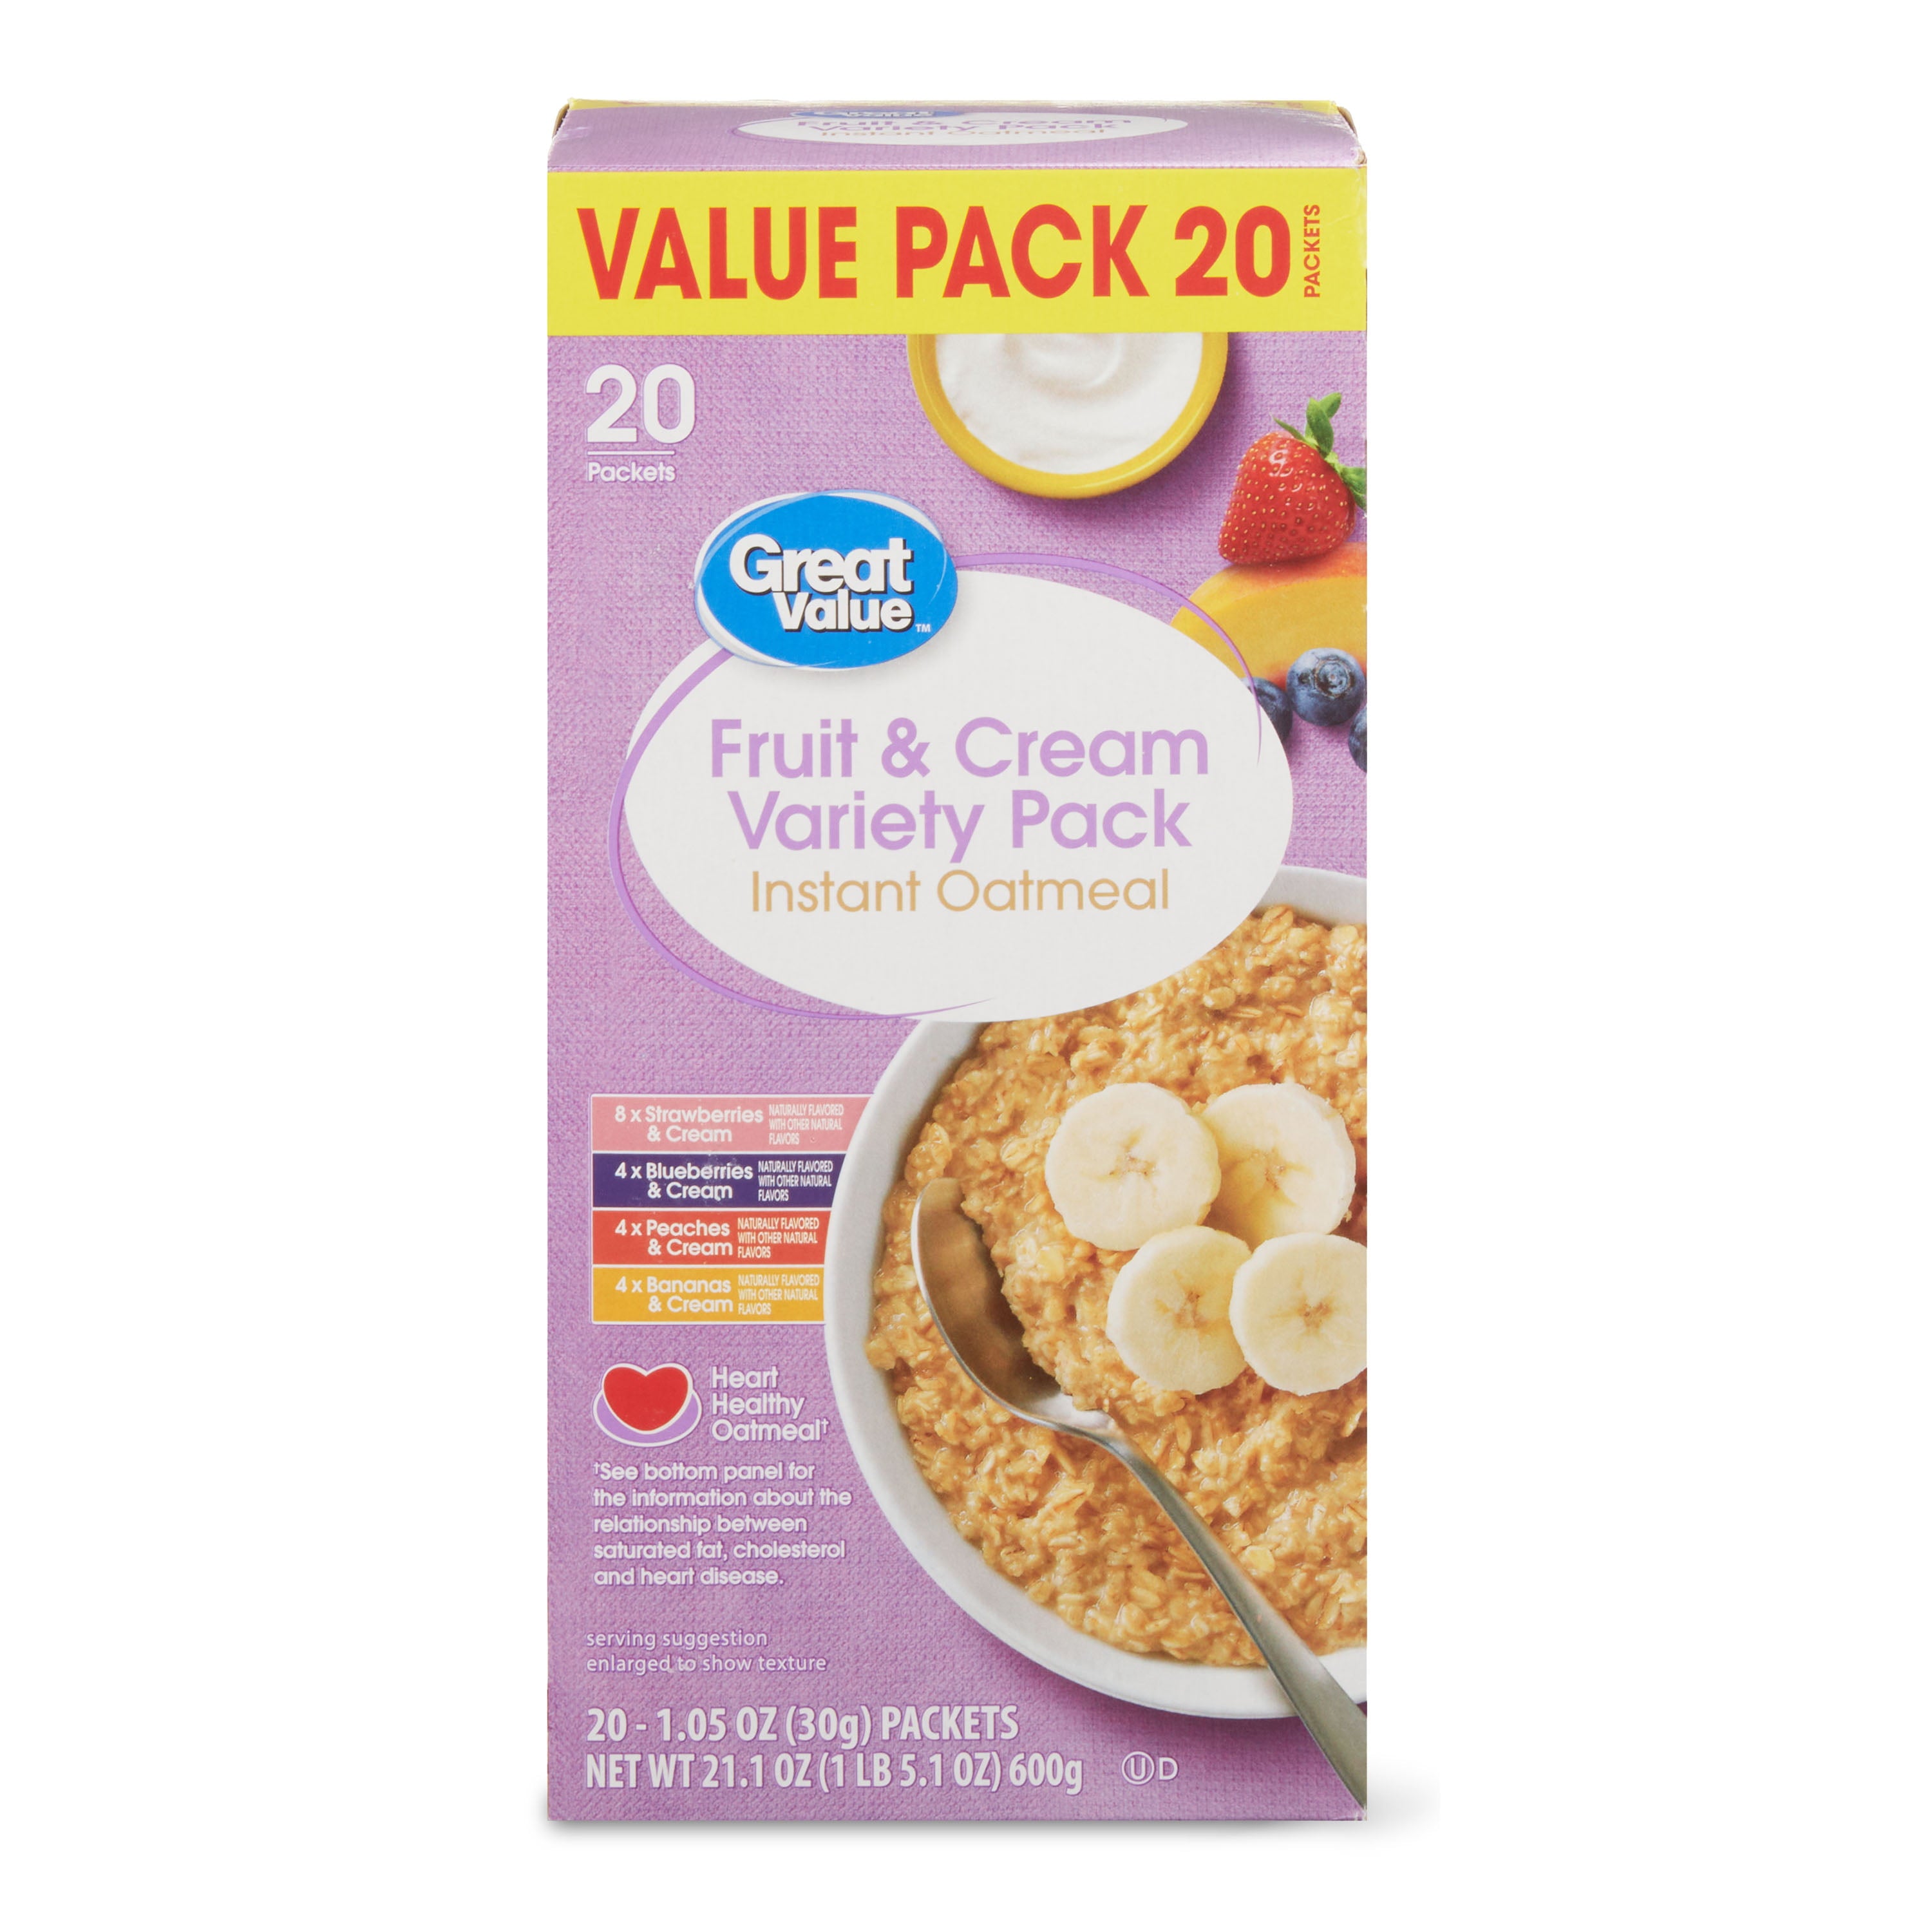 Great Value Fruit & Cream Variety Instant Oatmeal Value Pack, 1.05 oz, 20 Packet